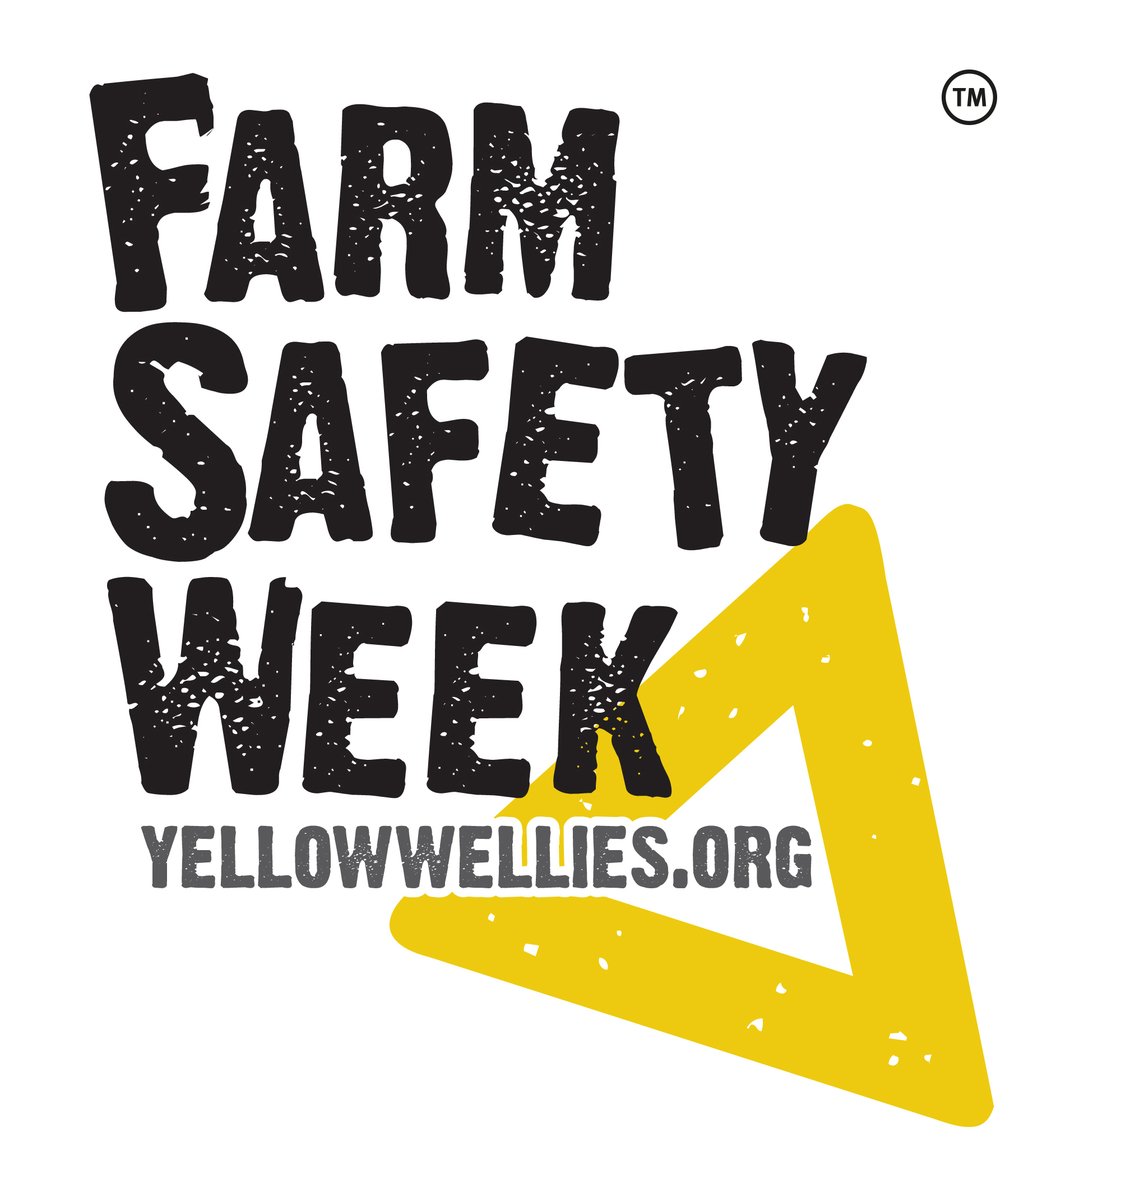 #FarmSafetyHour It's been an incredible #FarmSafetyWeek and there's still another day to go! What have you found most helpful so far? #CultivateChange #TogetherForSafety #EveryoneHomeSafe